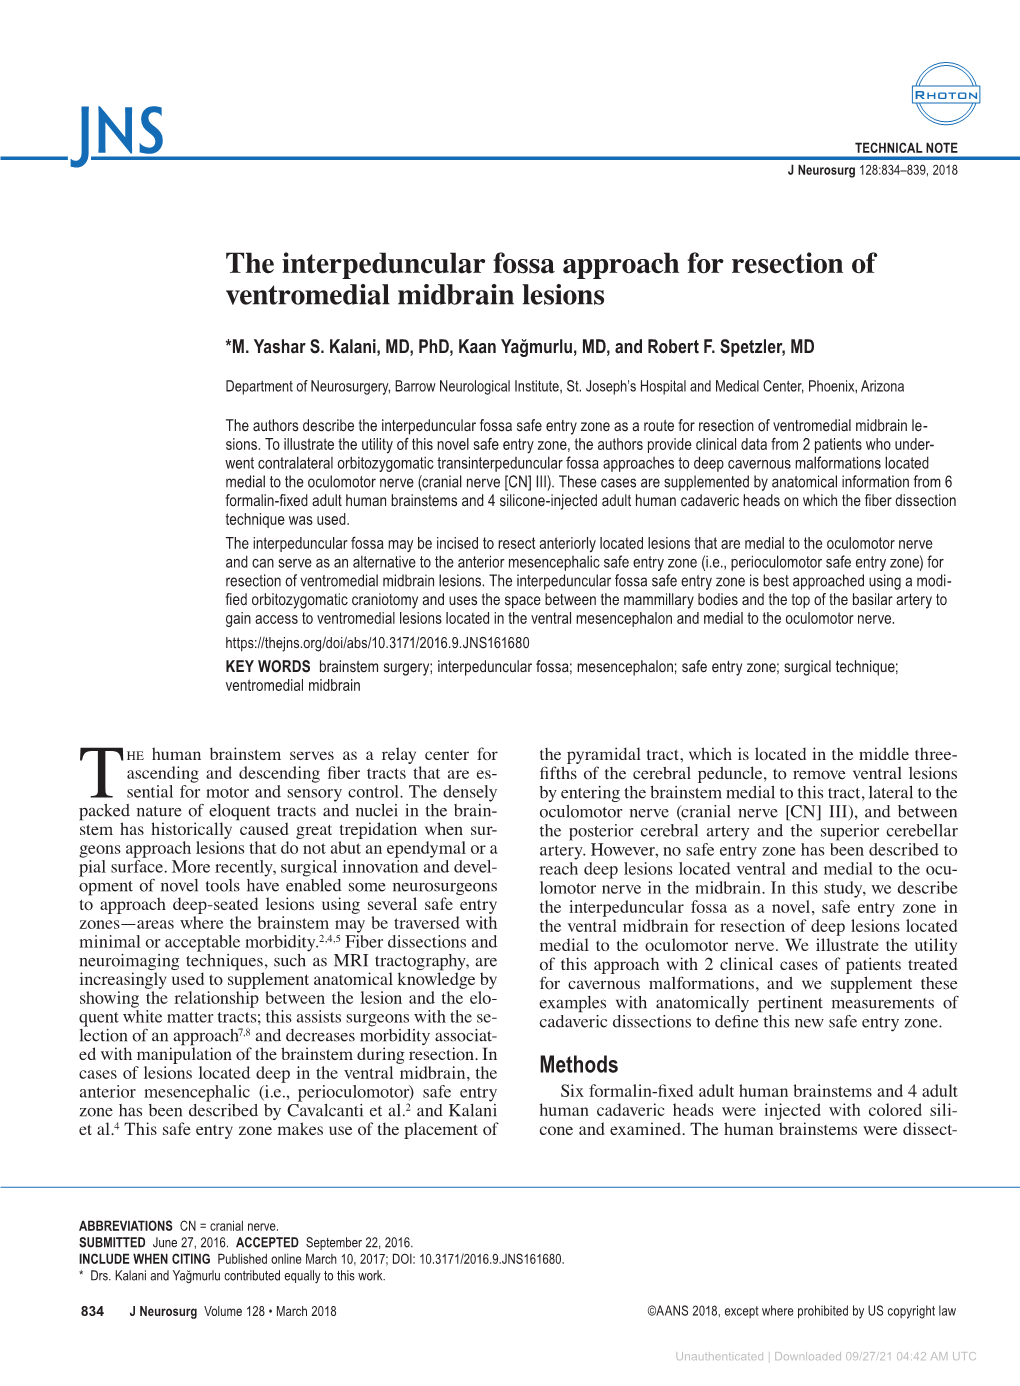 The Interpeduncular Fossa Approach for Resection of Ventromedial Midbrain Lesions